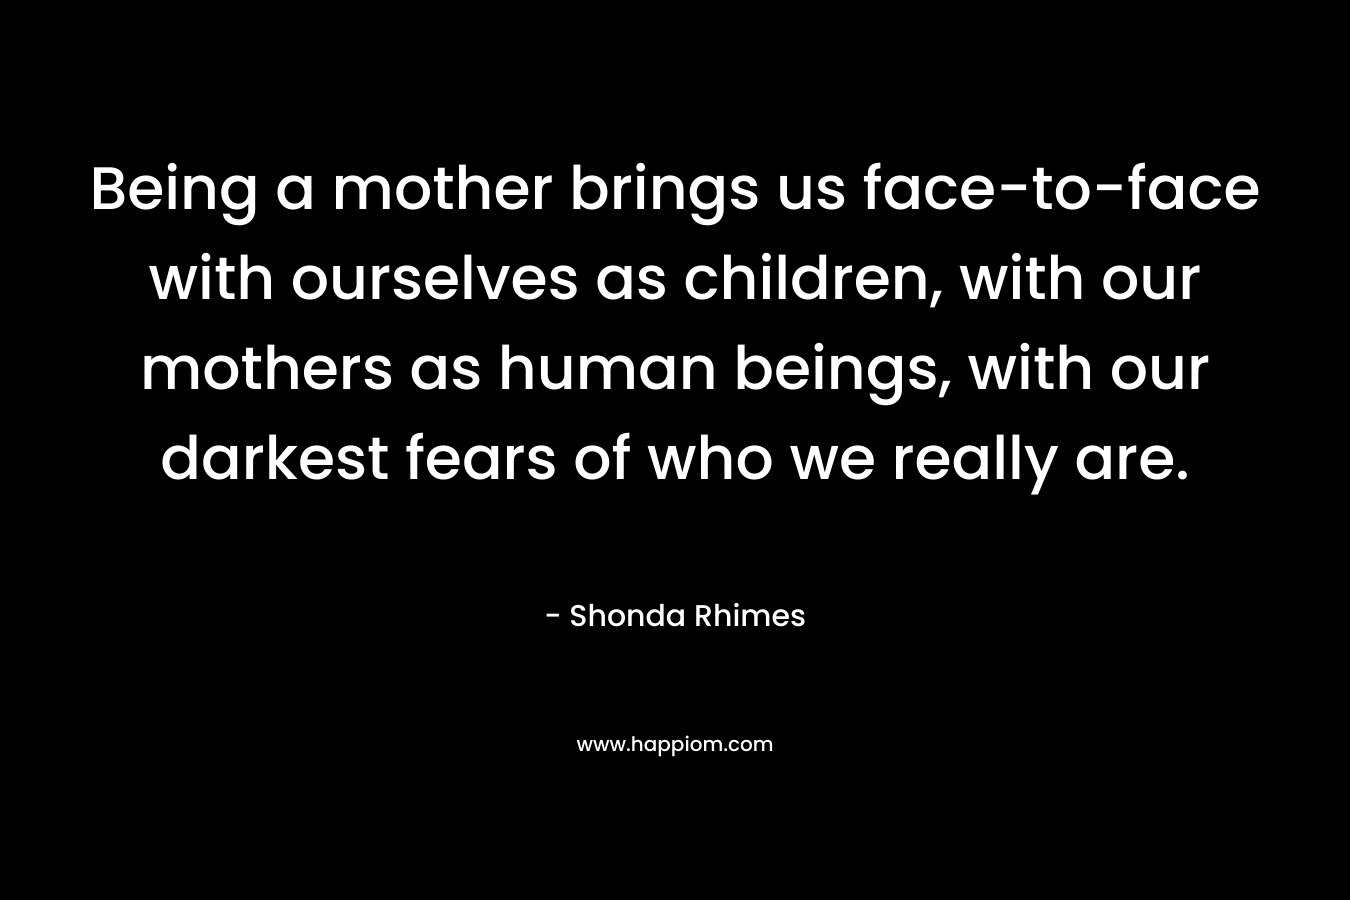 Being a mother brings us face-to-face with ourselves as children, with our mothers as human beings, with our darkest fears of who we really are.